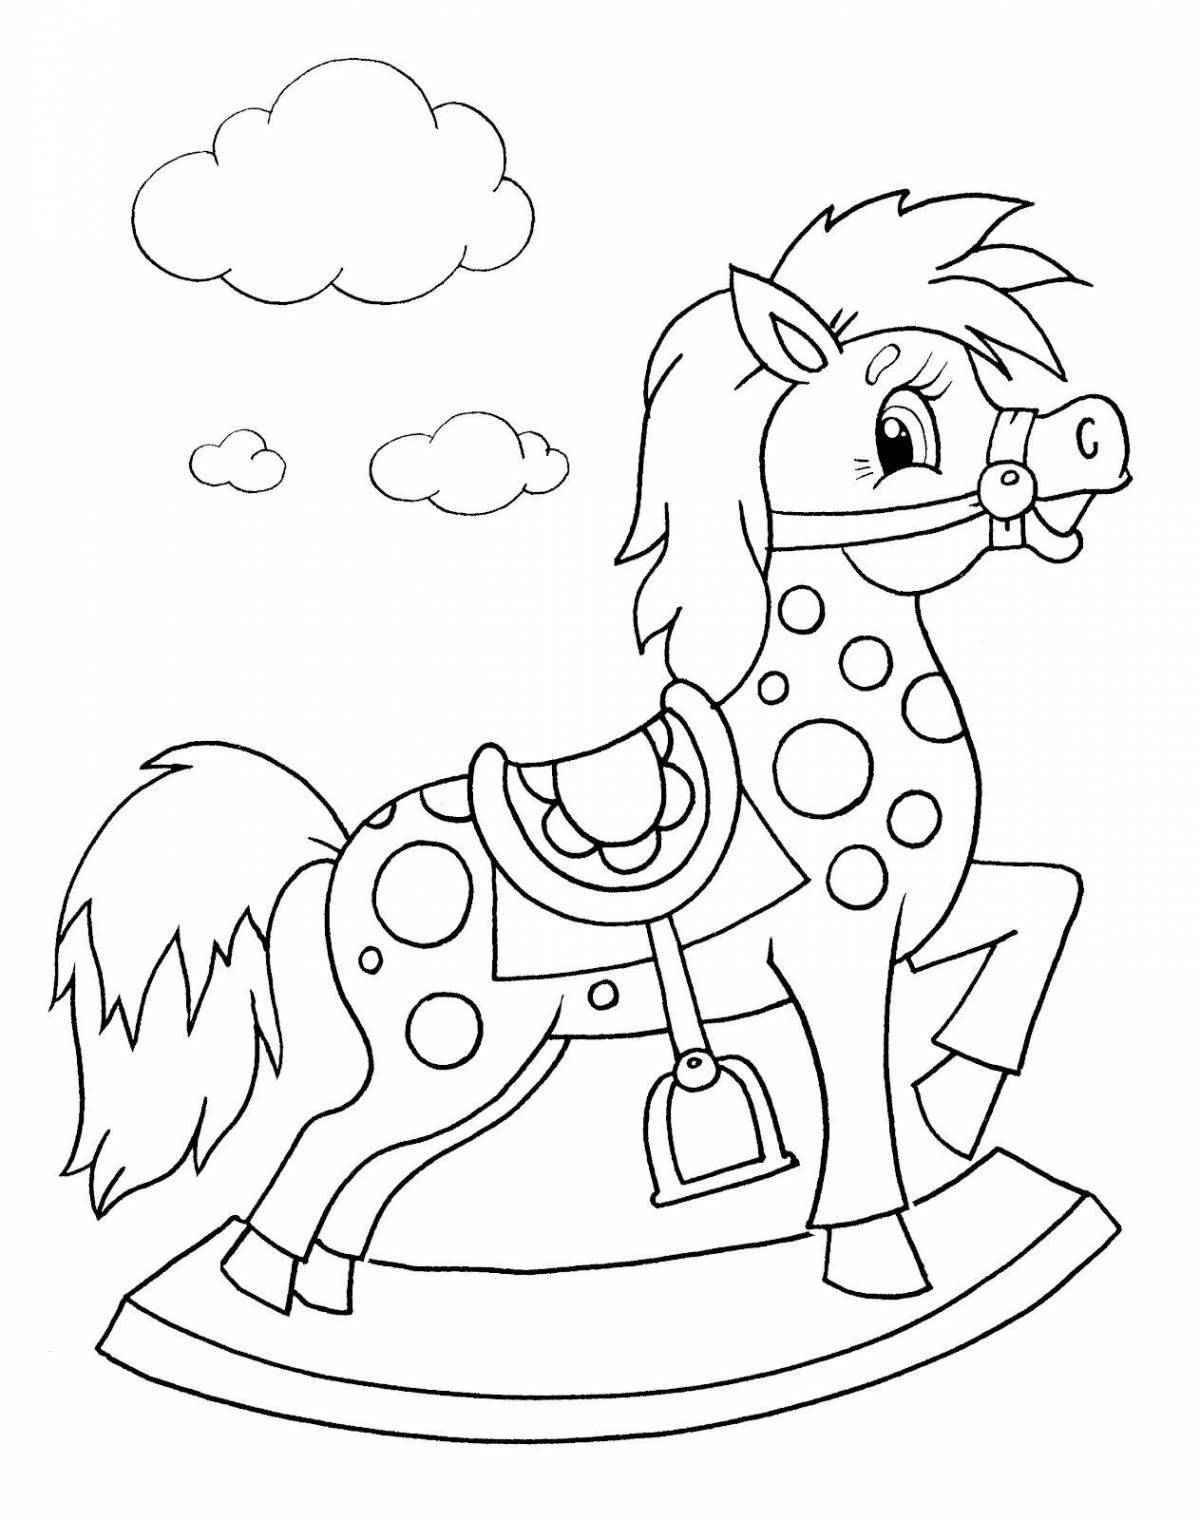 Color-frenzy coloring page coloring book for children